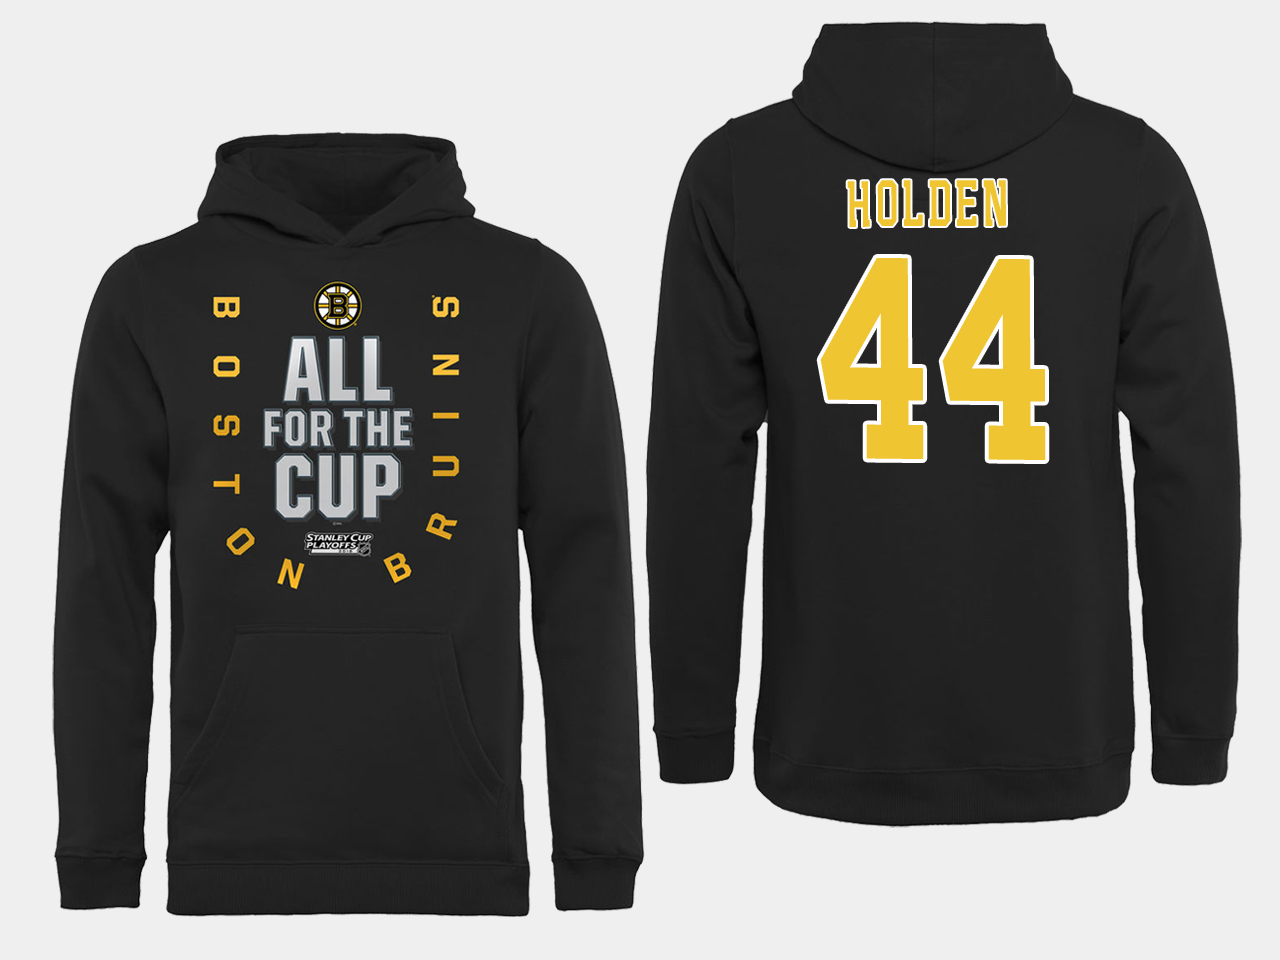 NHL Men Boston Bruins #44 Holden Black All for the Cup Hoodie->boston bruins->NHL Jersey